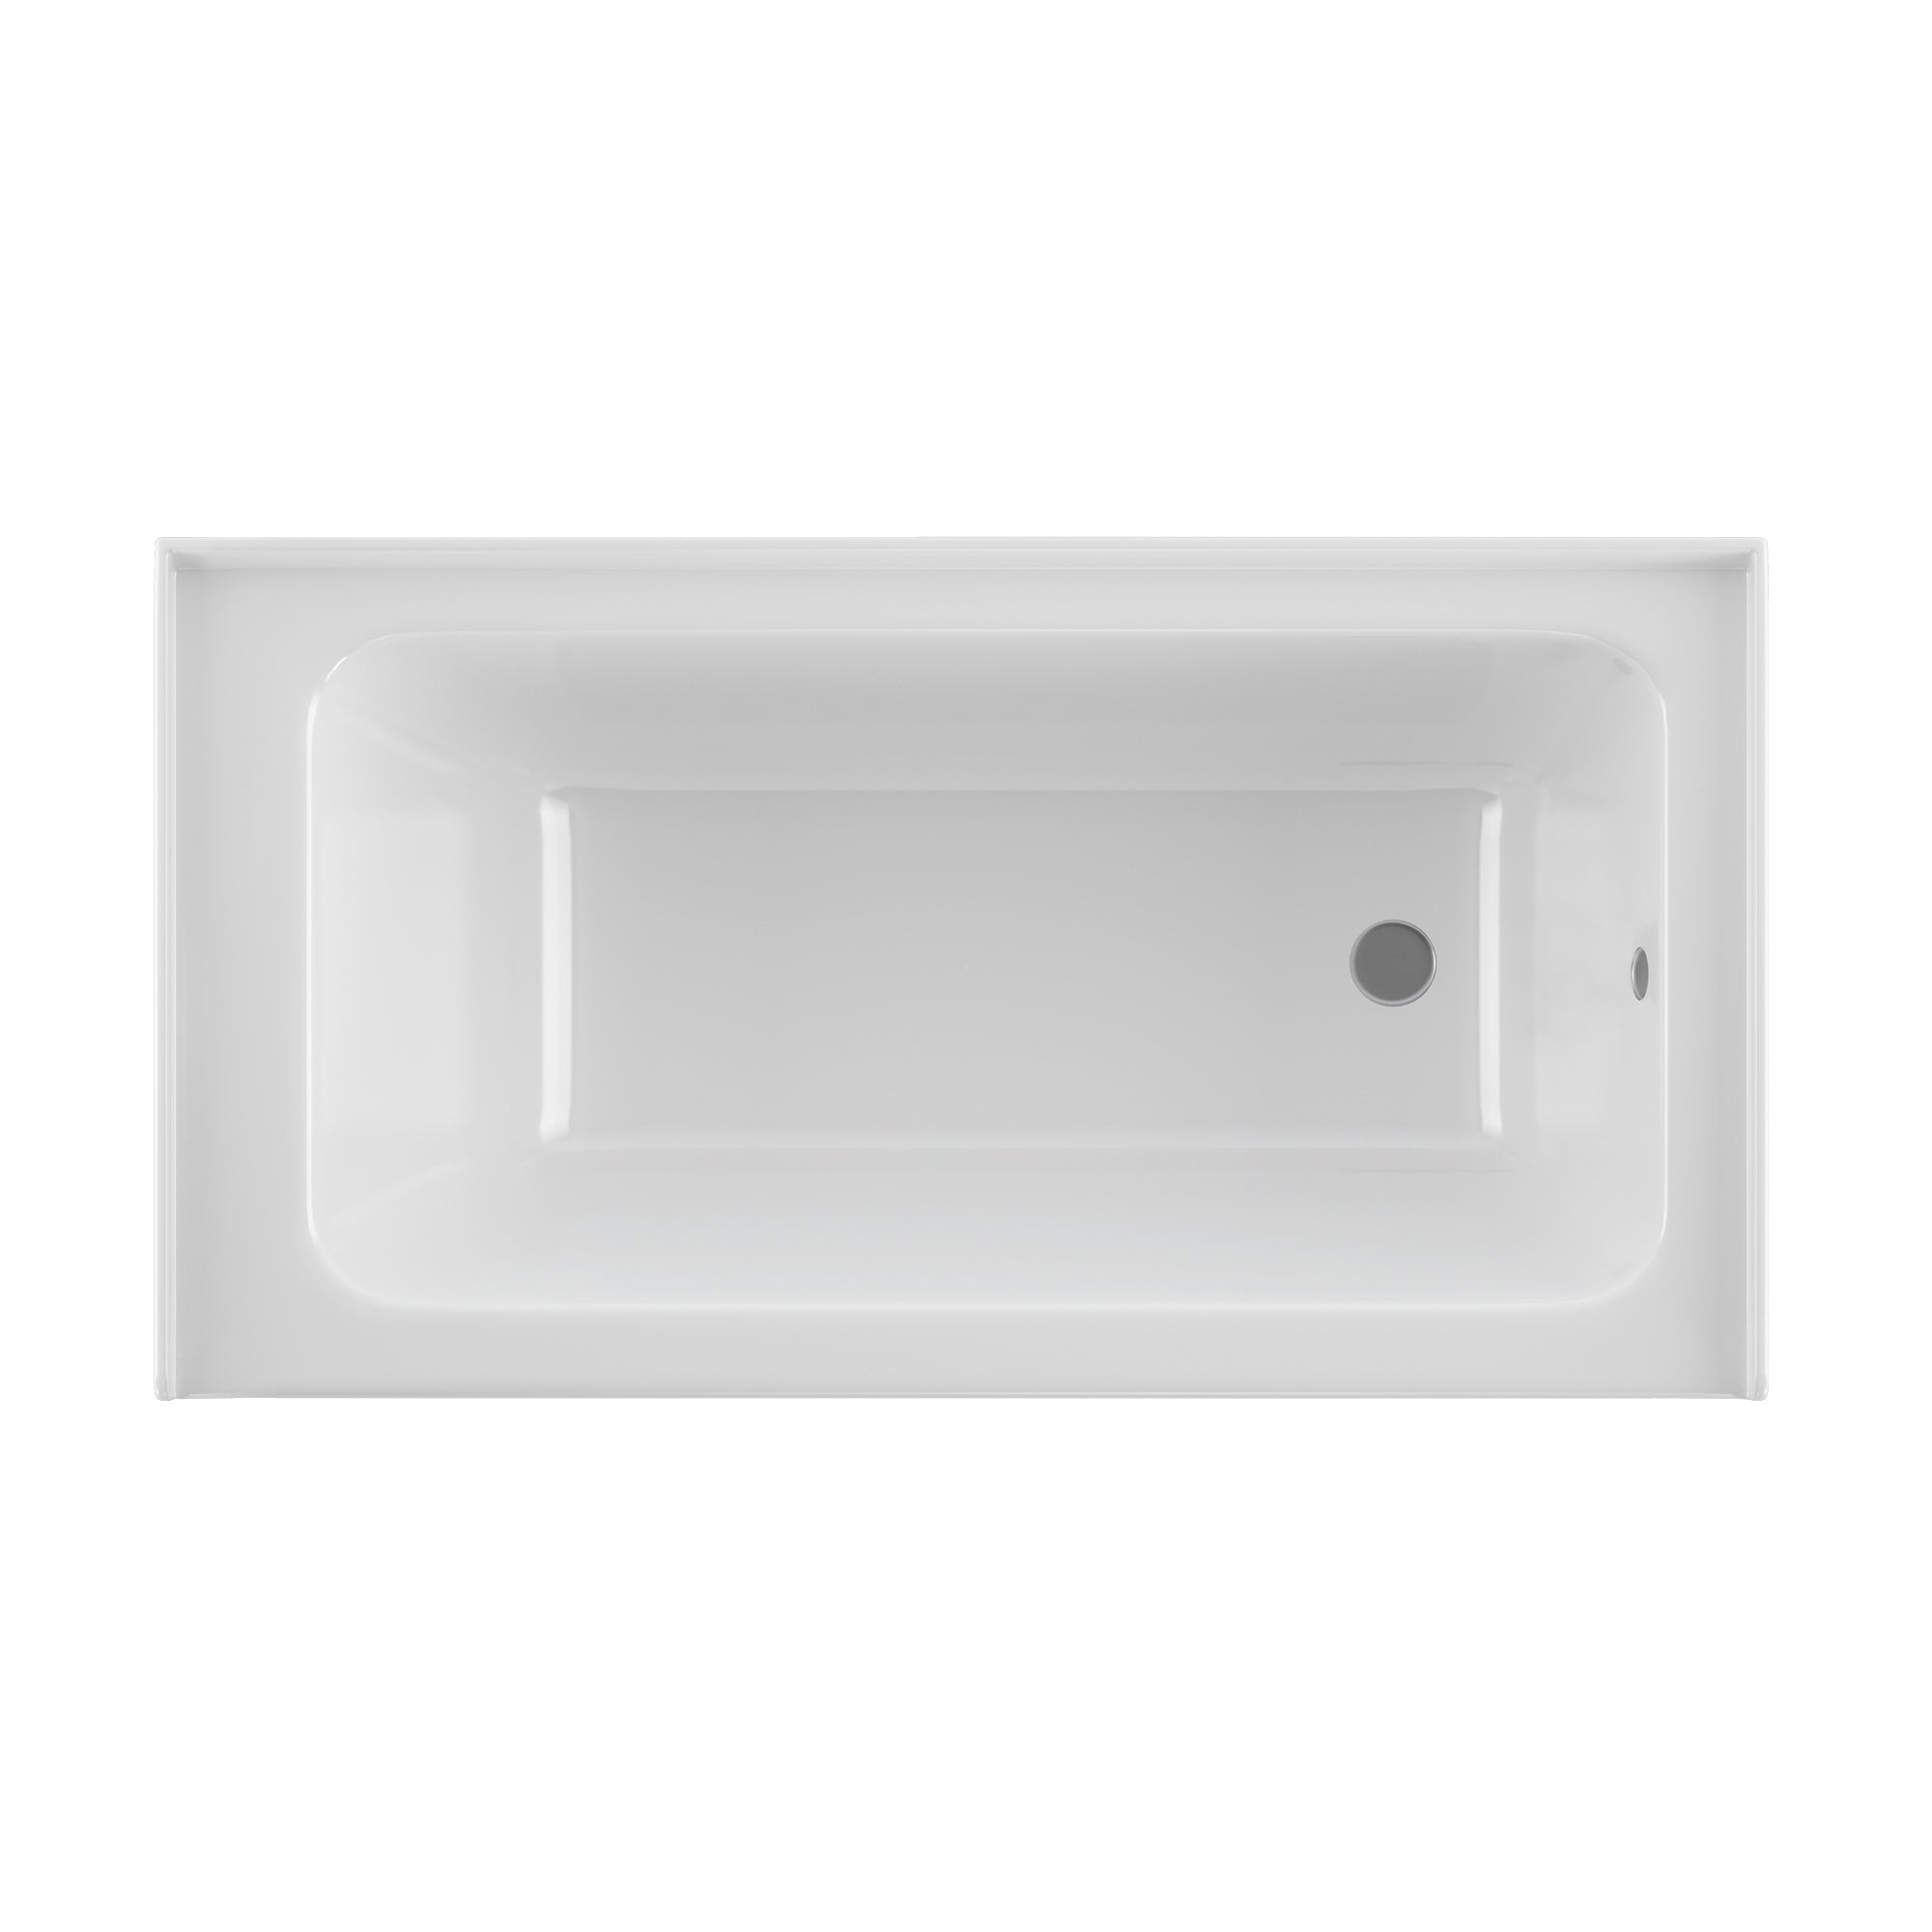 PULSE ShowerSpas 30" Wide White 100% High Gloss Acrylic Alcove Tub - Fiberglass middle layer - 20"H x 60"W x 30"D - Right Configuration - PT-2001-30 - Vital Hydrotherapy